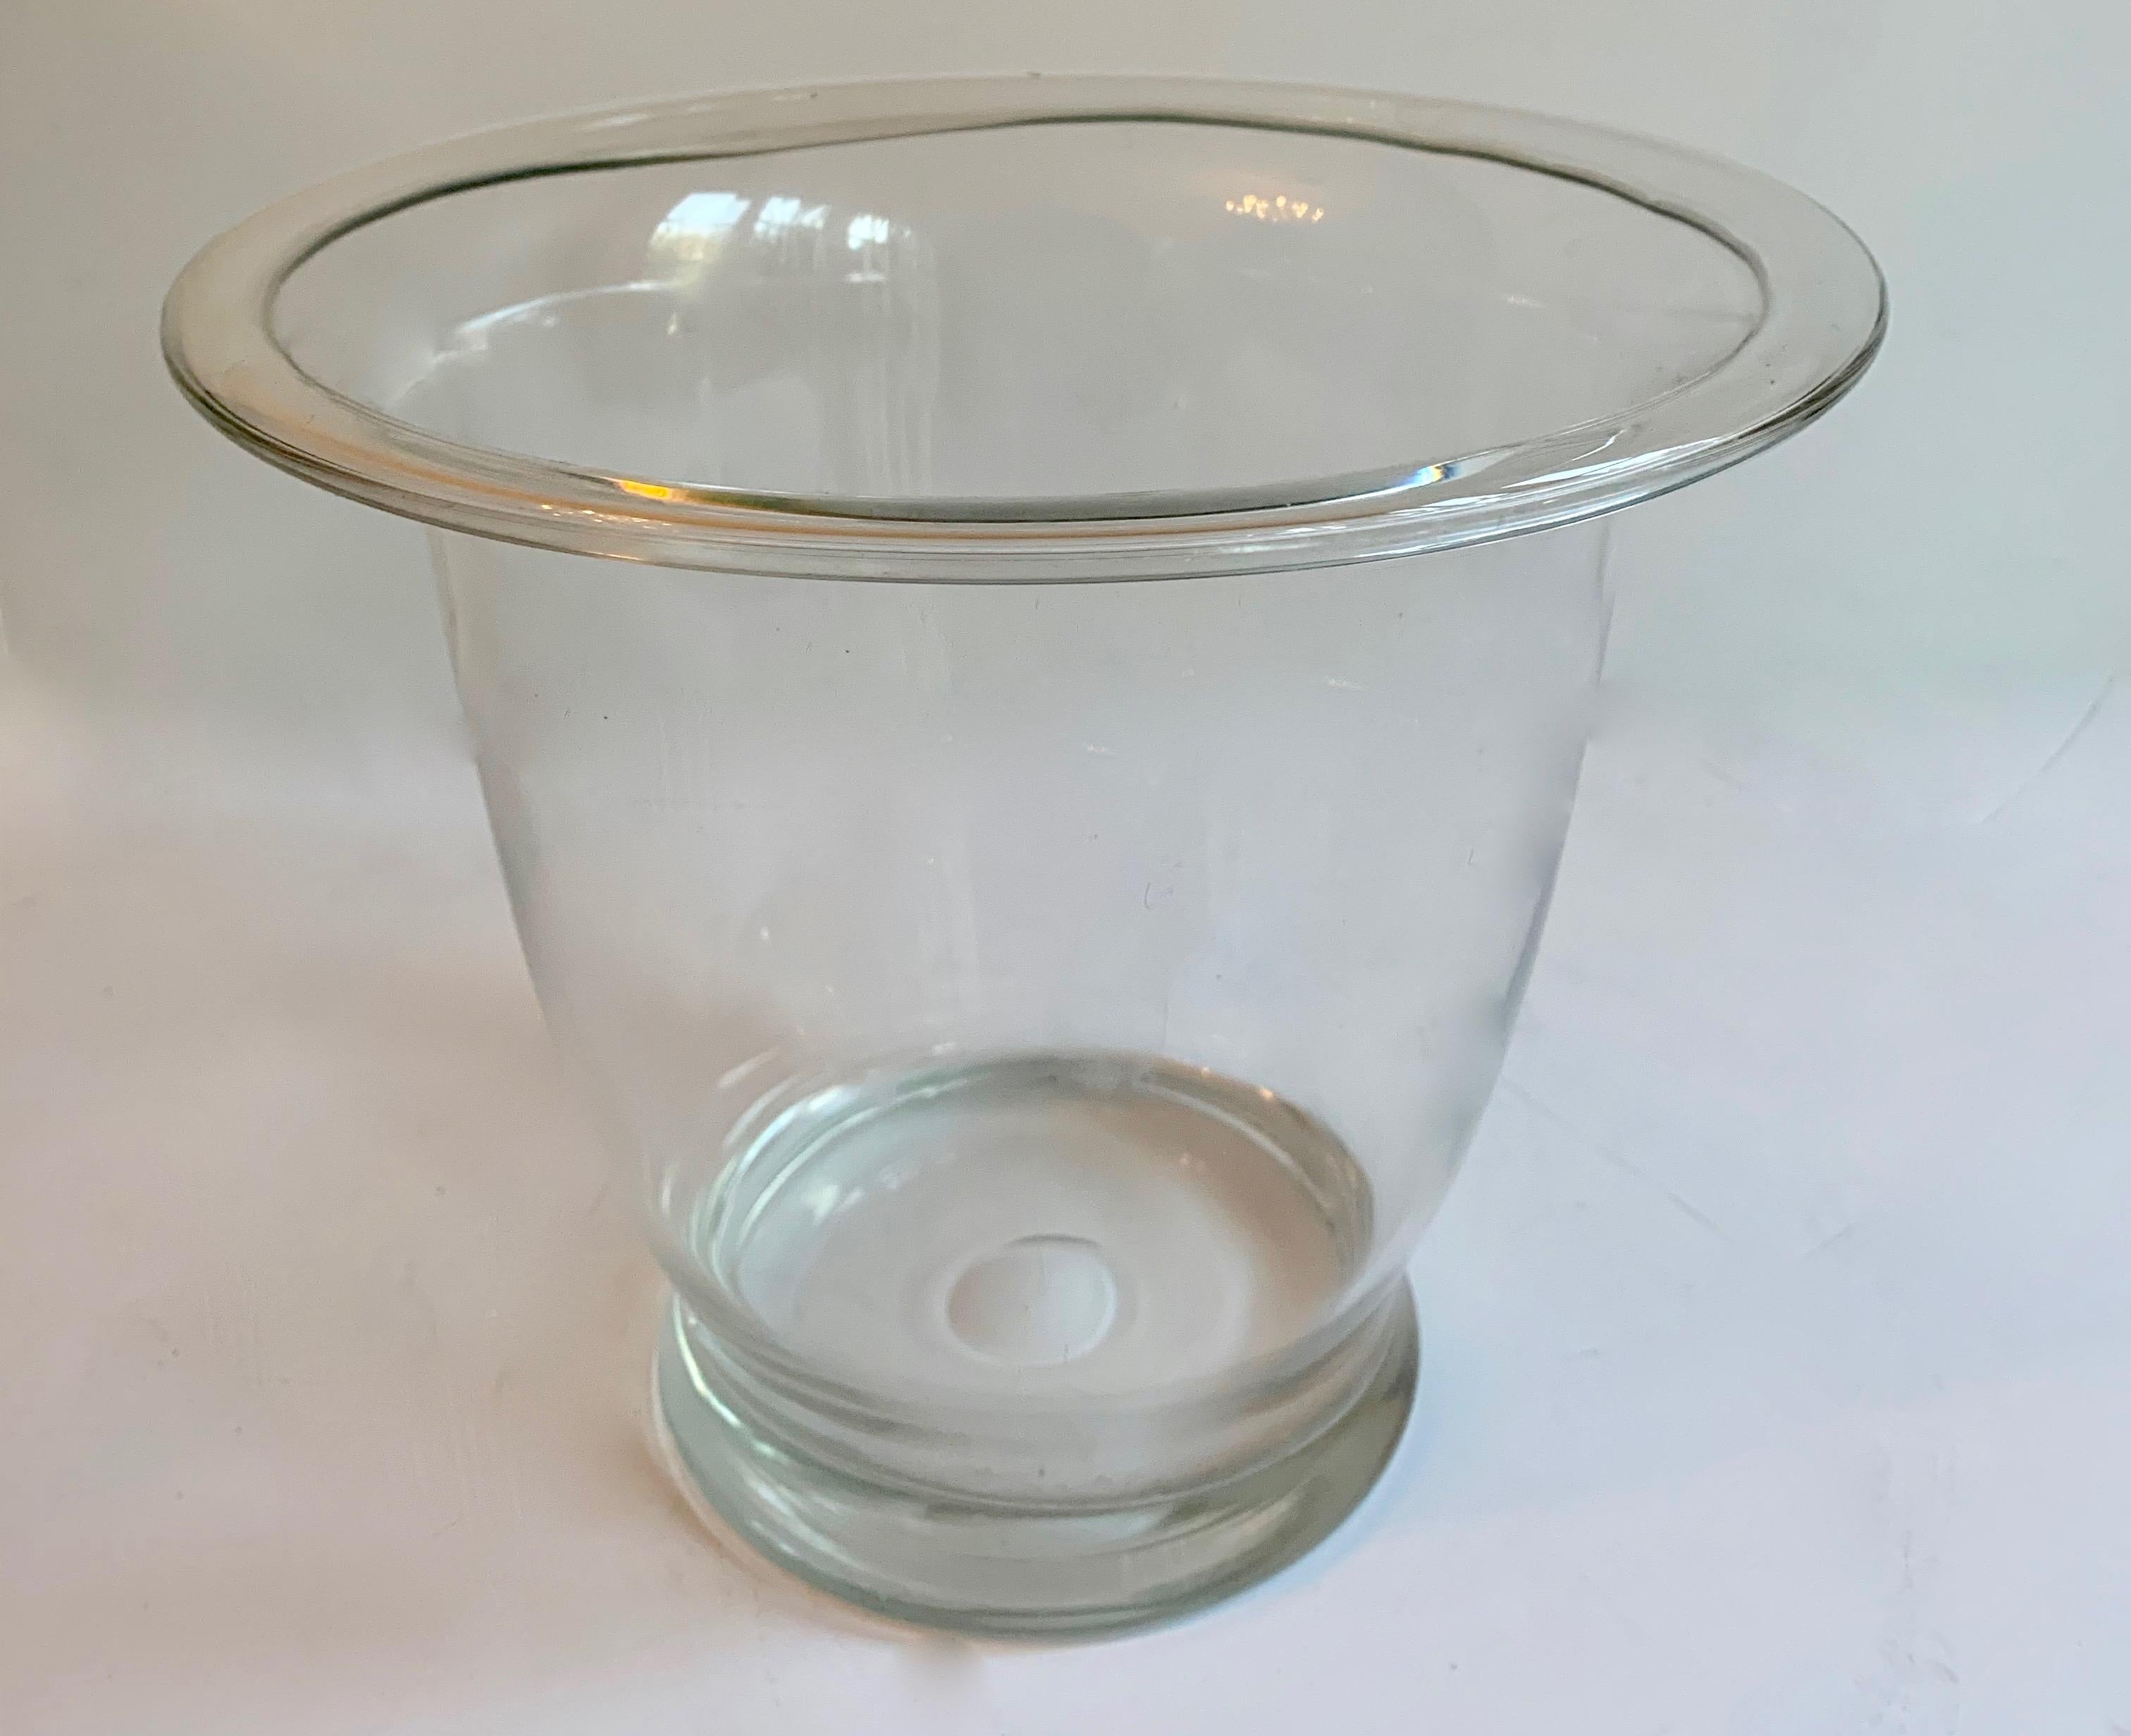 A wonderful deco ice bucket with raised handles. The piece is made of newly polished aluminum and looks wonderful. On the reverse side please not the areas that were divers from age that could not be polished. 

The piece has a glass liner for